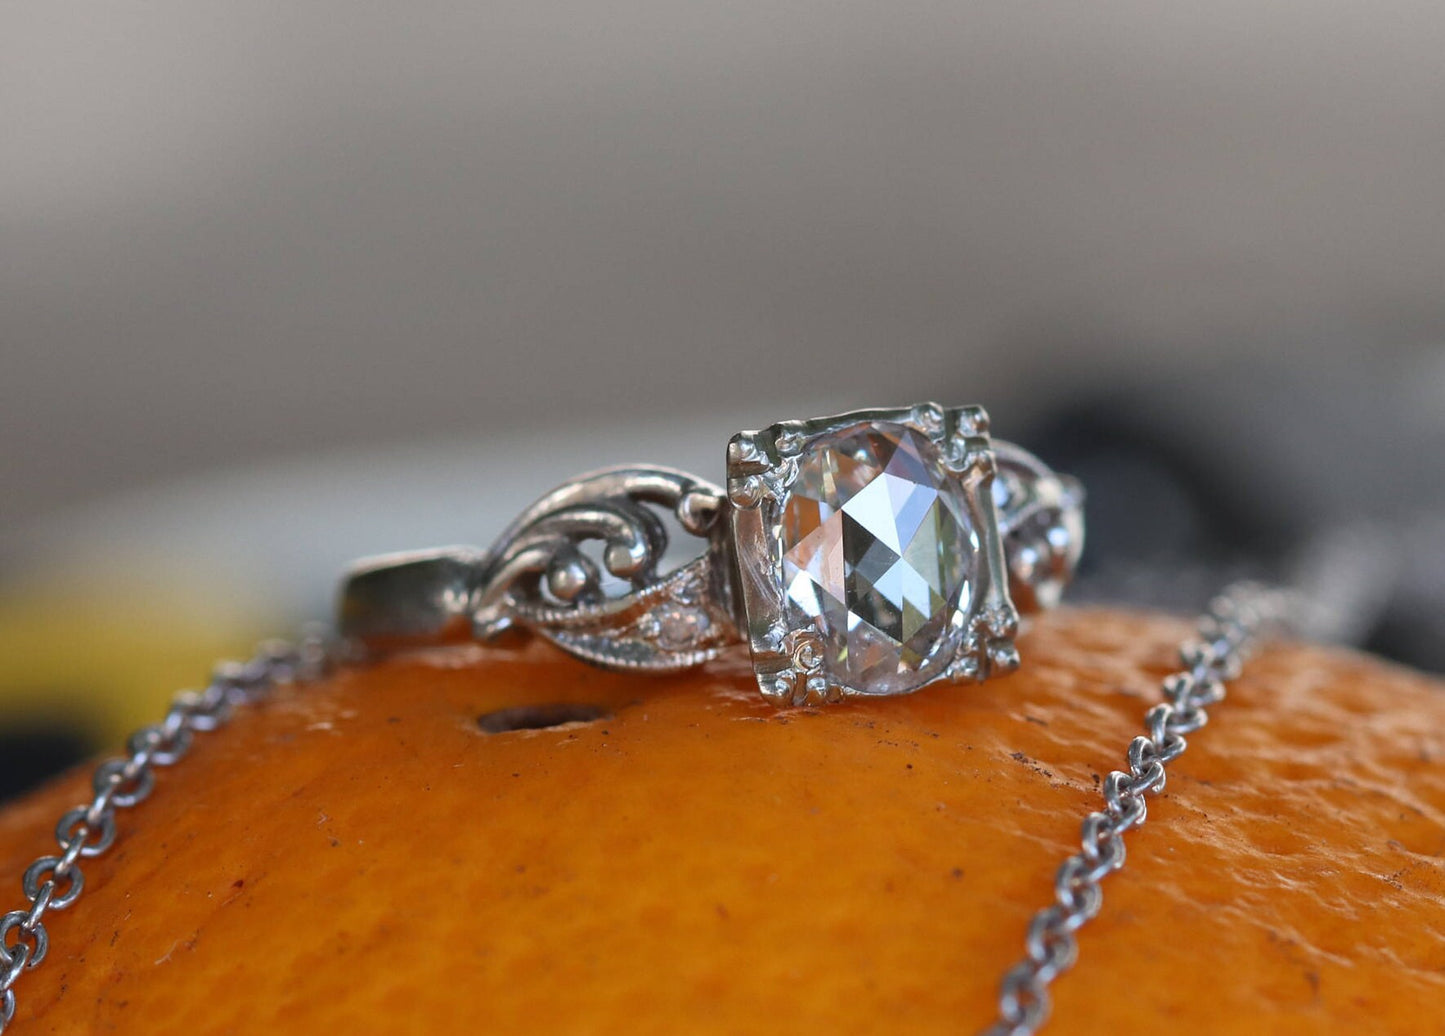 Rose cut diamond (.76ct) ring set in 1950s 14k white gold size 5.25 sizable